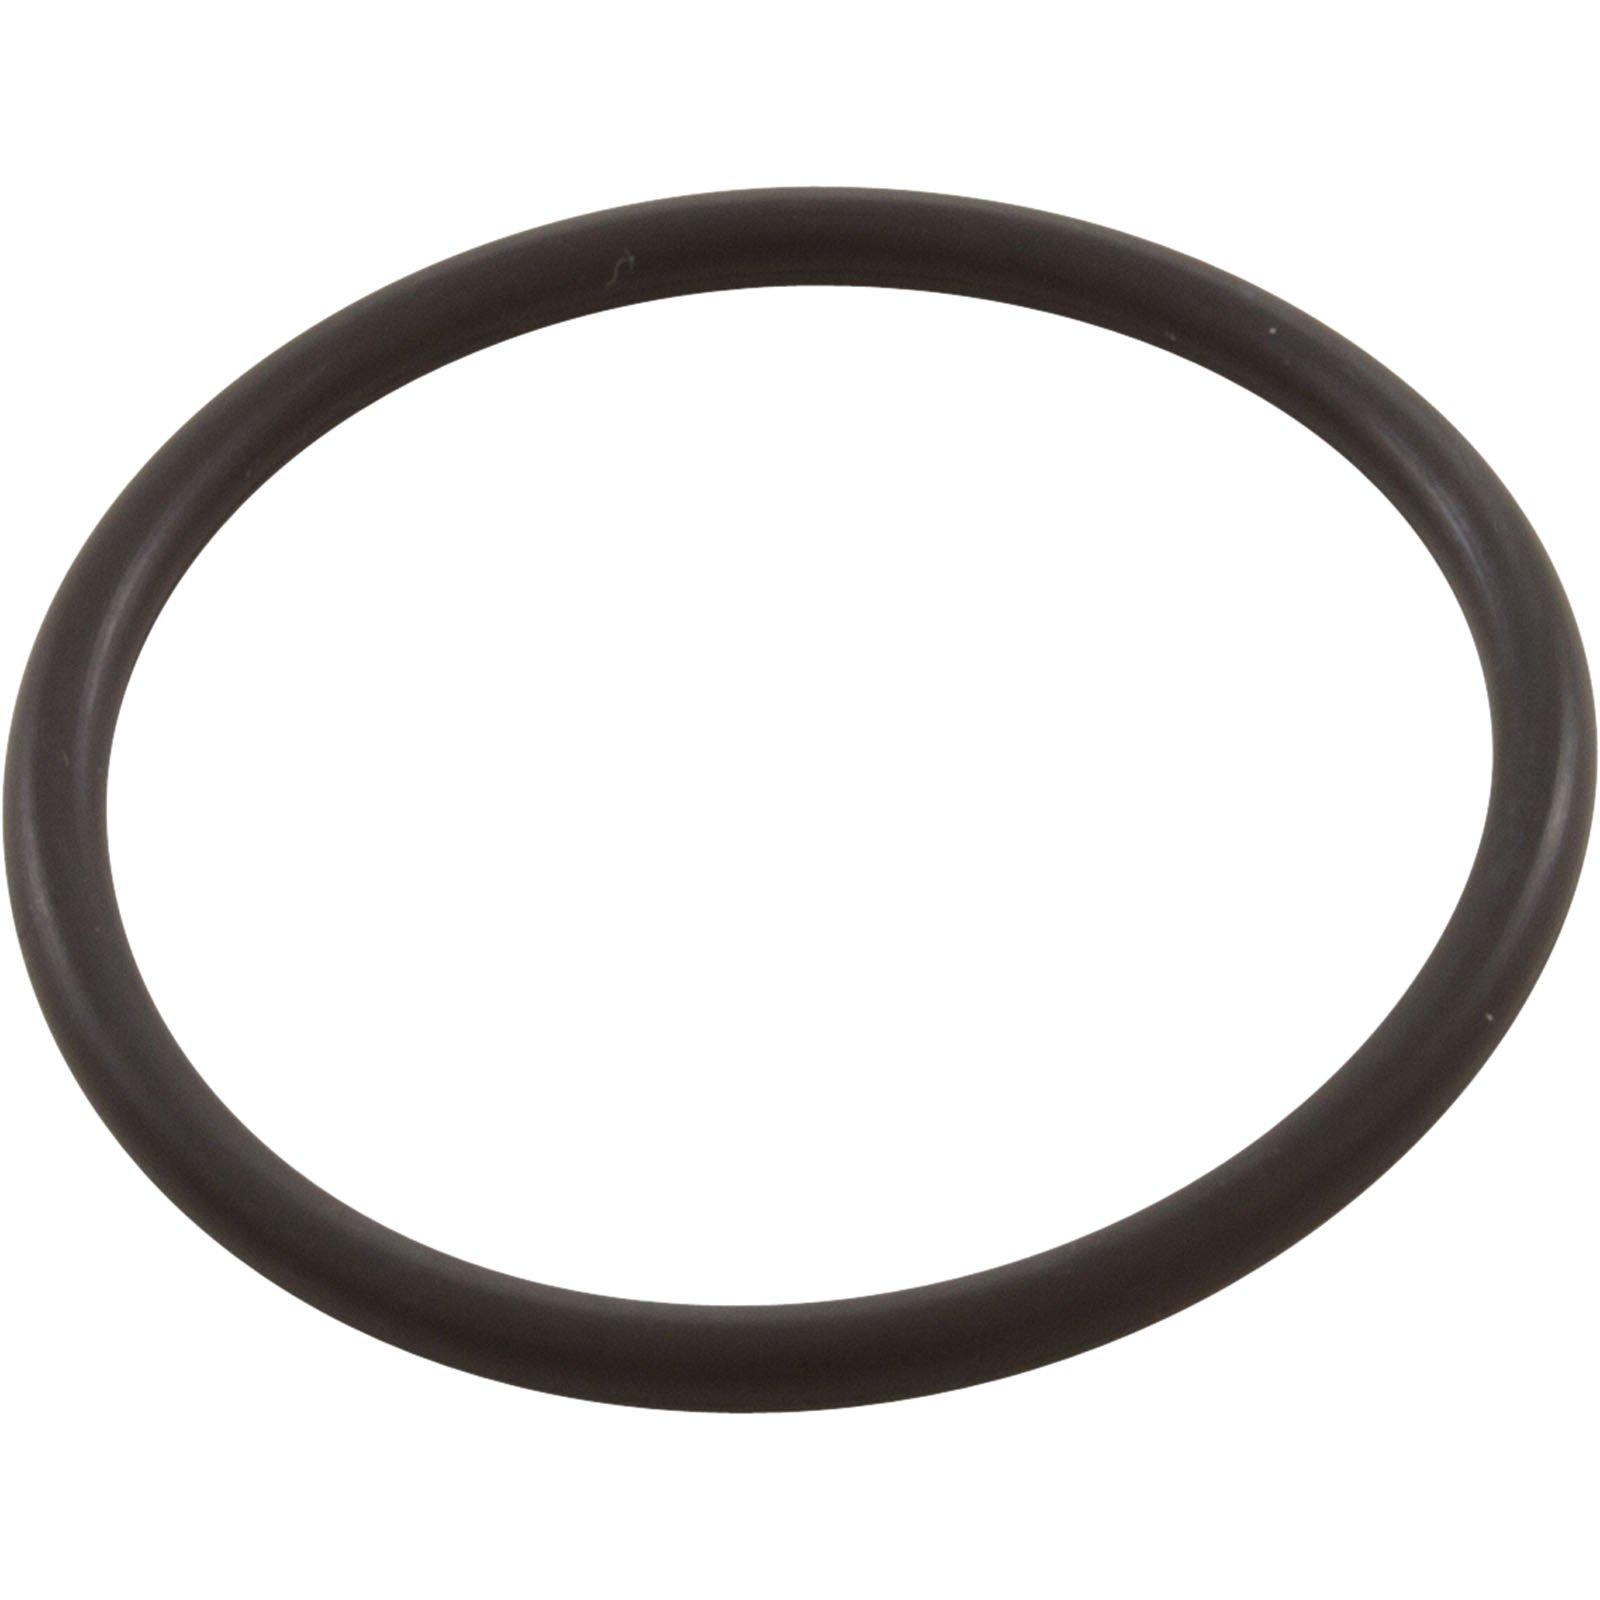 O-Ring 1-3/4 ID 1/8 Cross Section Generic